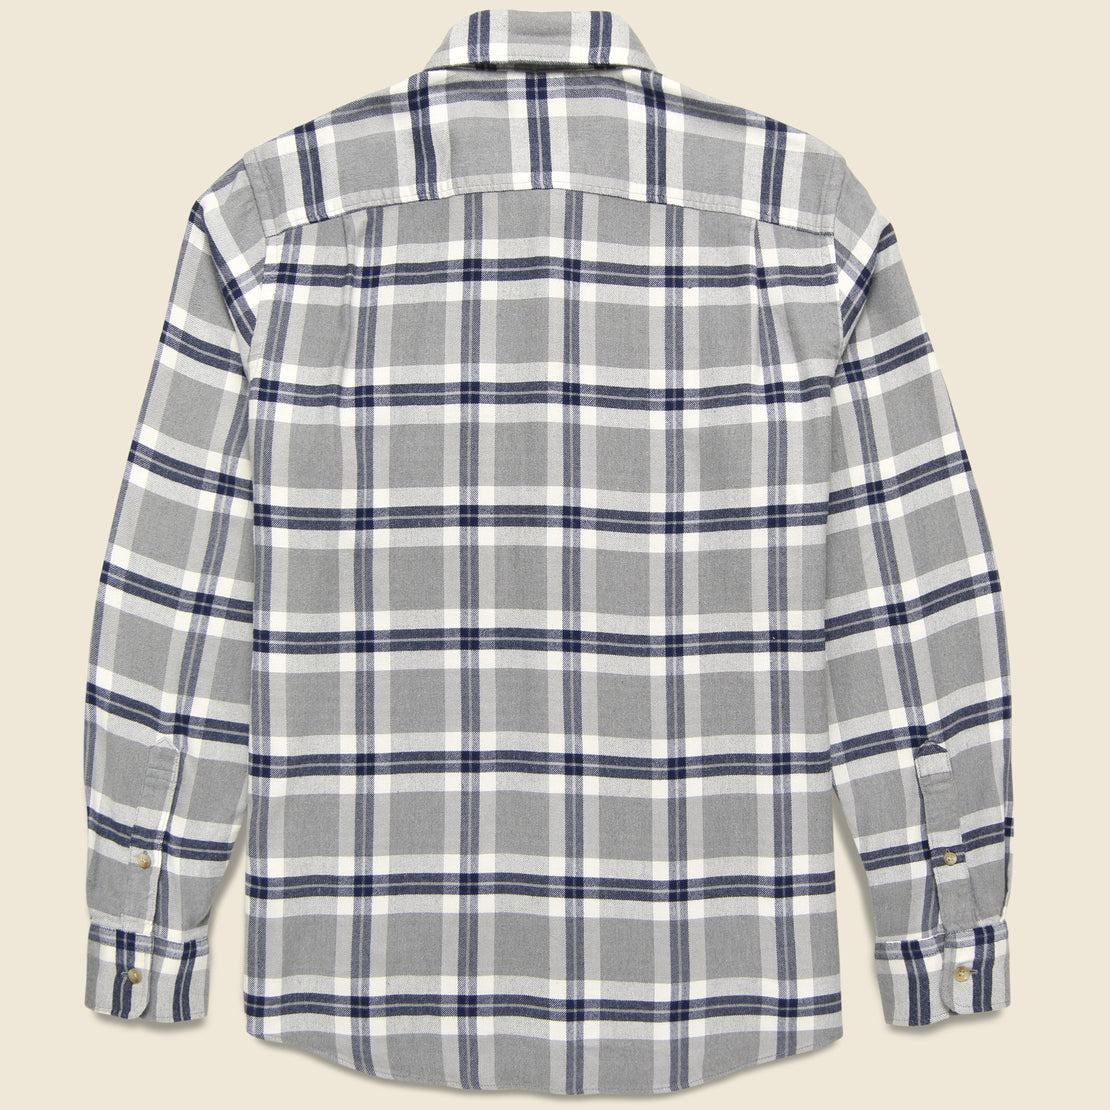 Movement Flannel - Prospect Creek Plaid - Faherty - STAG Provisions - Tops - L/S Woven - Plaid